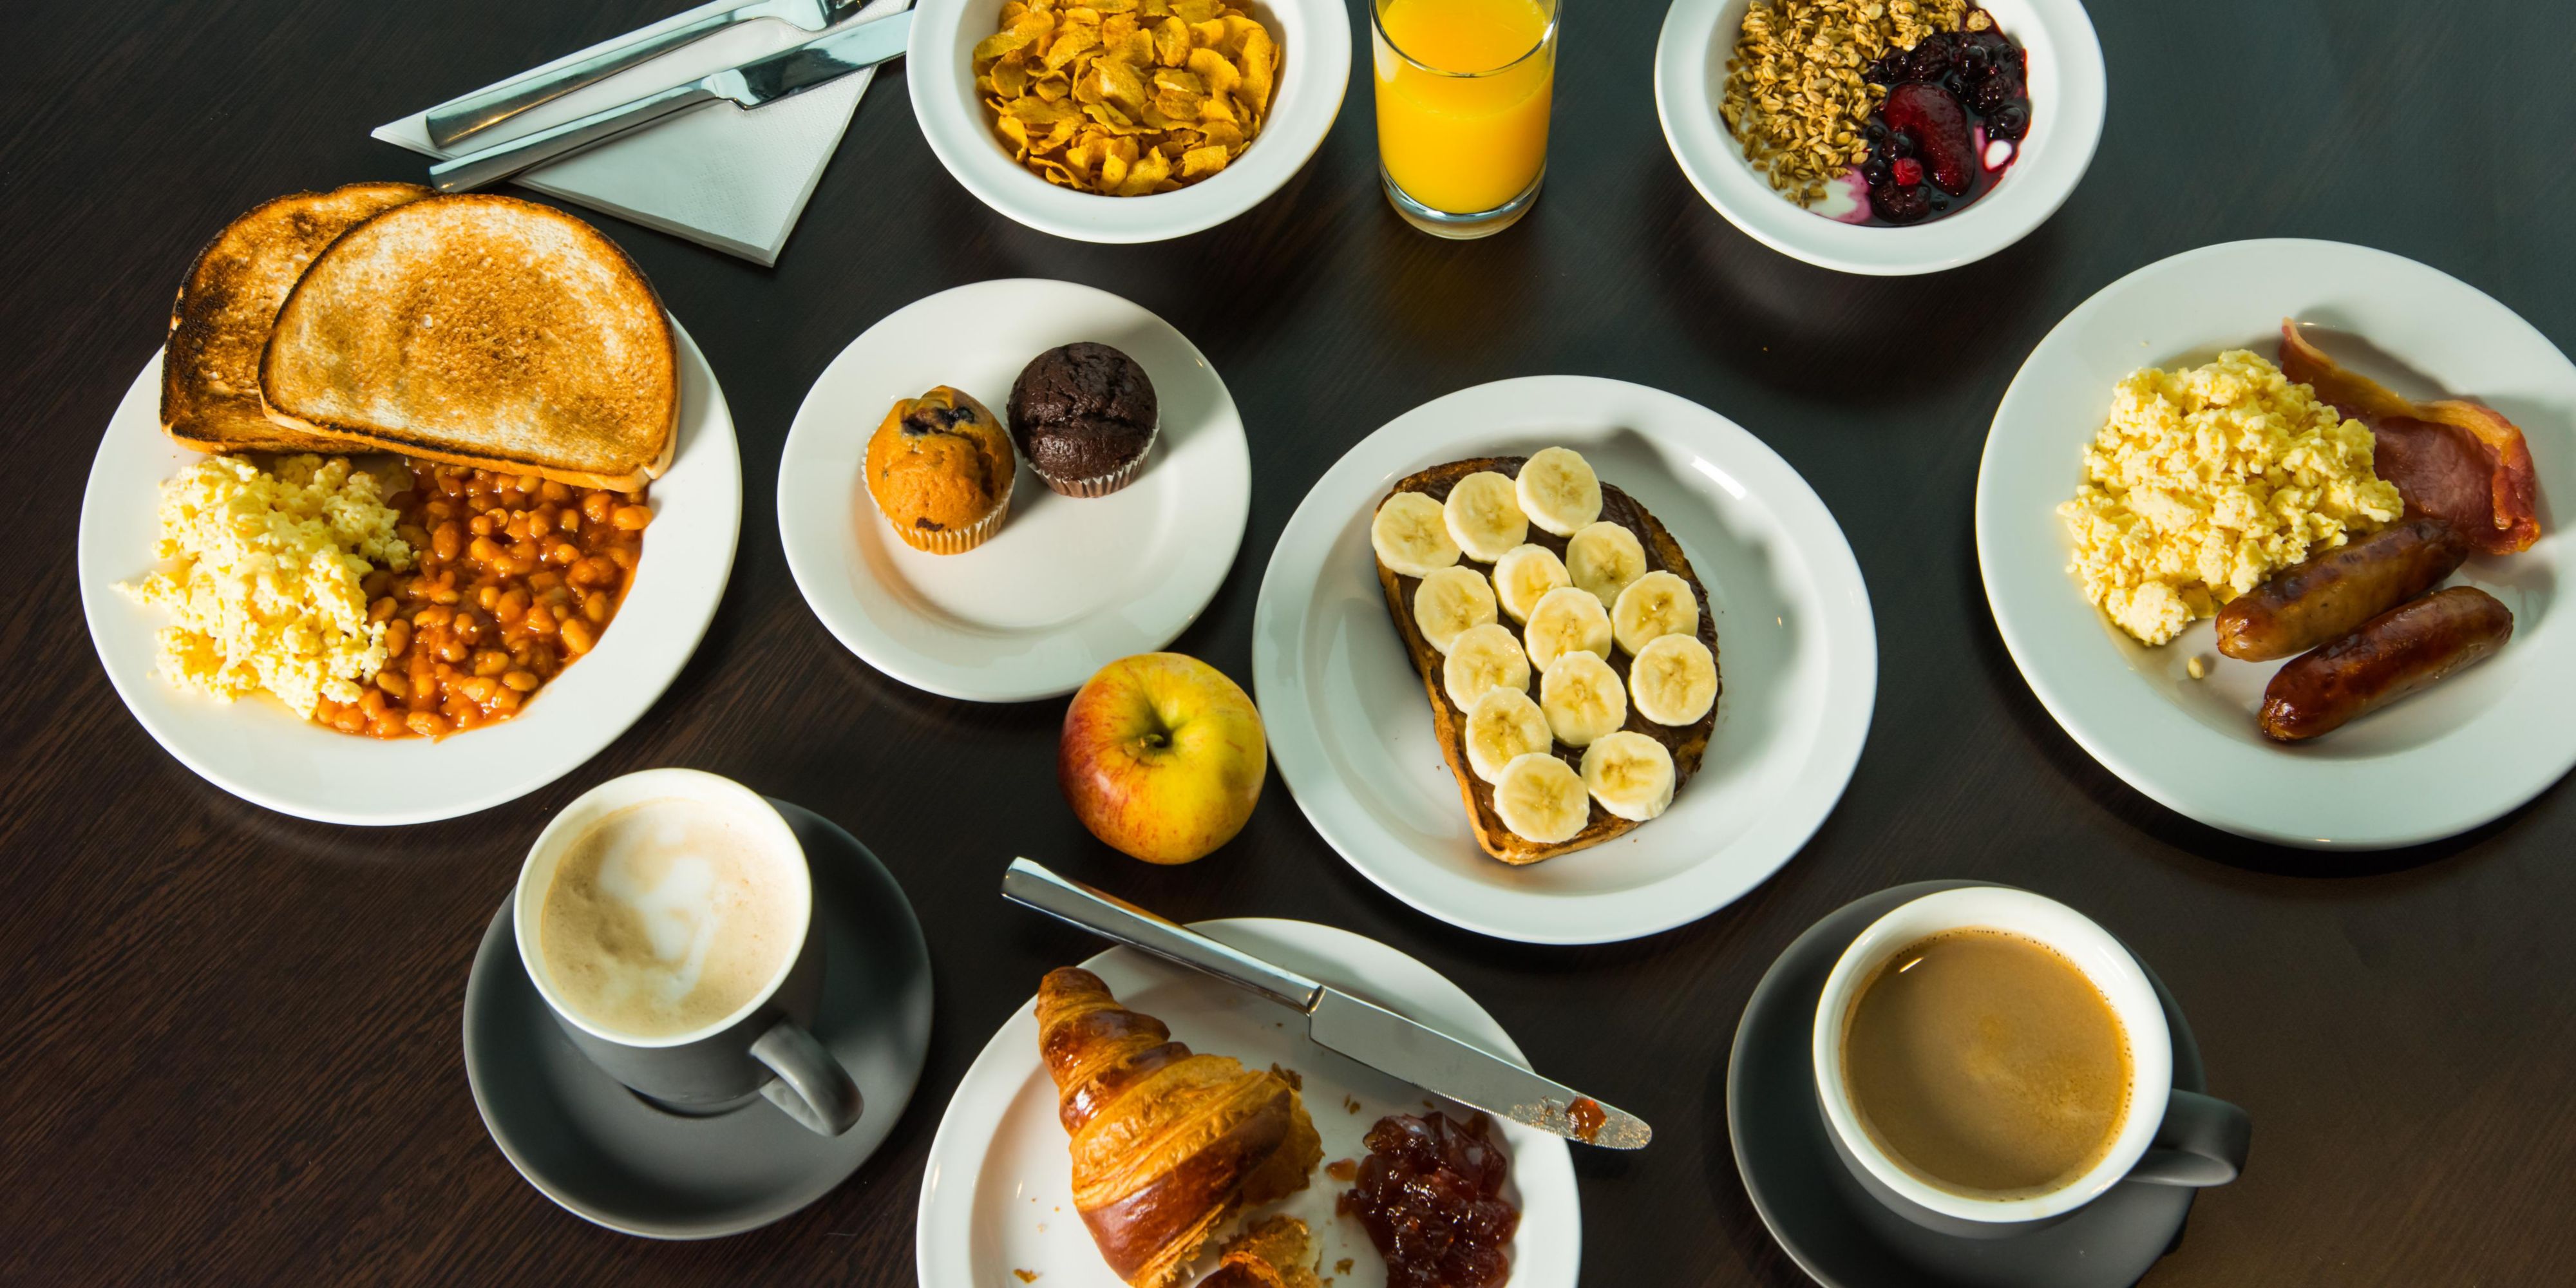 Kick-start your morning with our inclusive breakfast. Choose from a selection of hot and cold items like bacon, scrambled egg, sausages, toast and pastries. Grab & go bags are available if you're in a hurry!